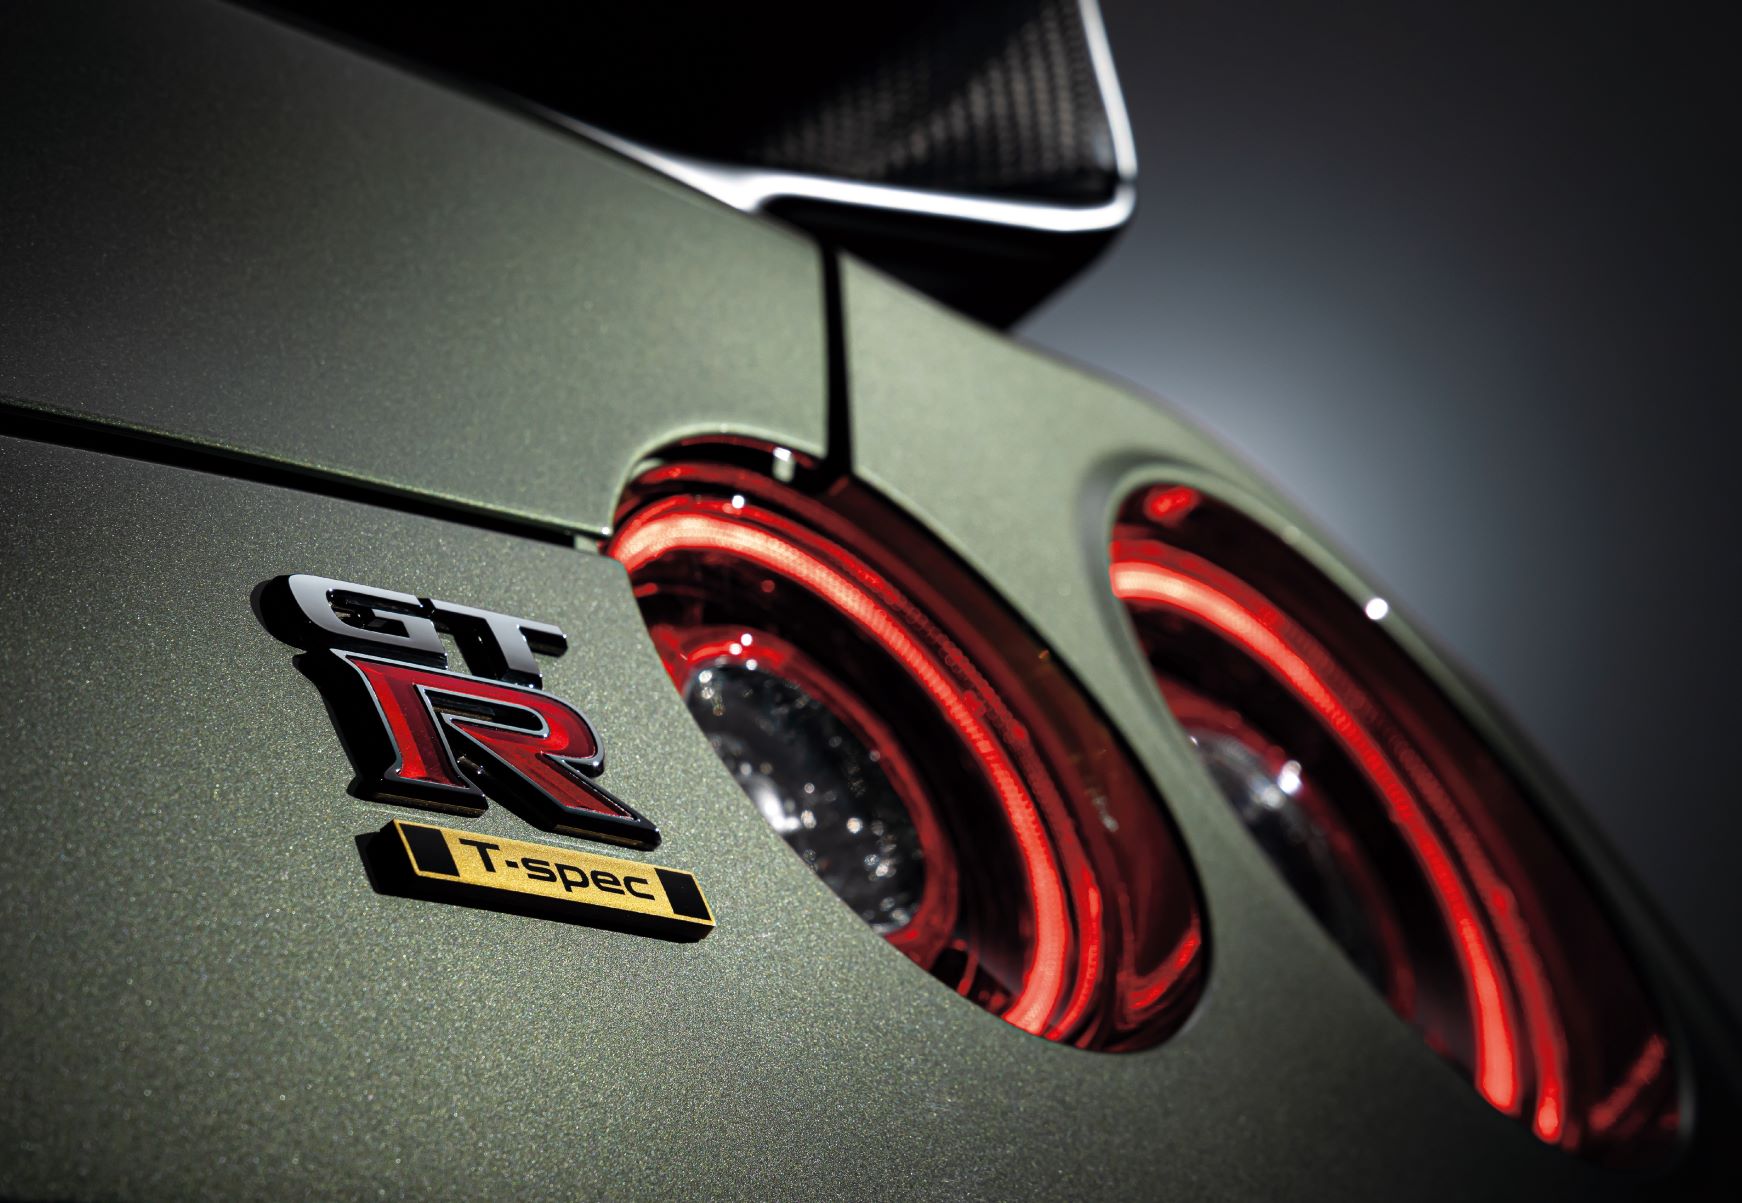 T-Spec badge on the Japan only 2021 GT-R